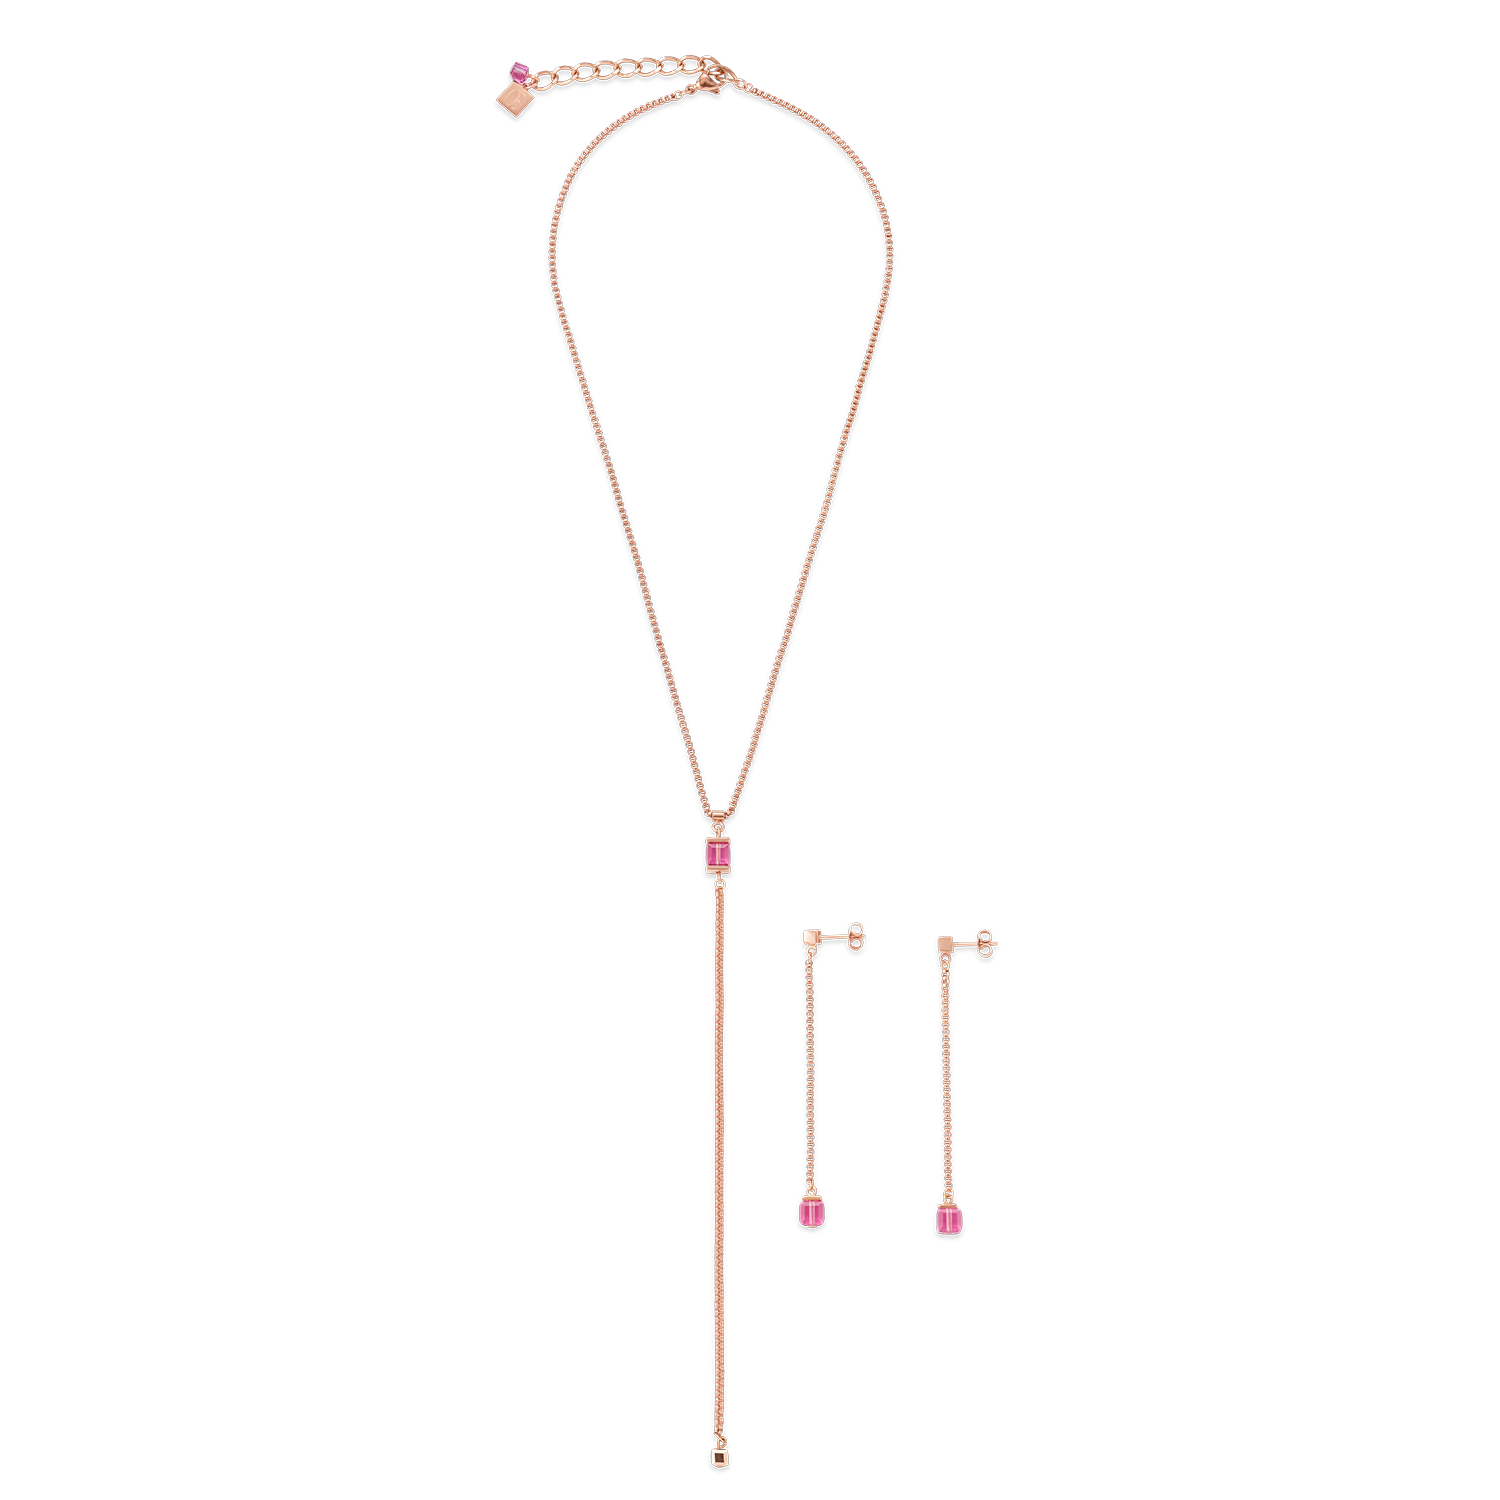 Necklace Stainless Steel rose gold & Crystals rose